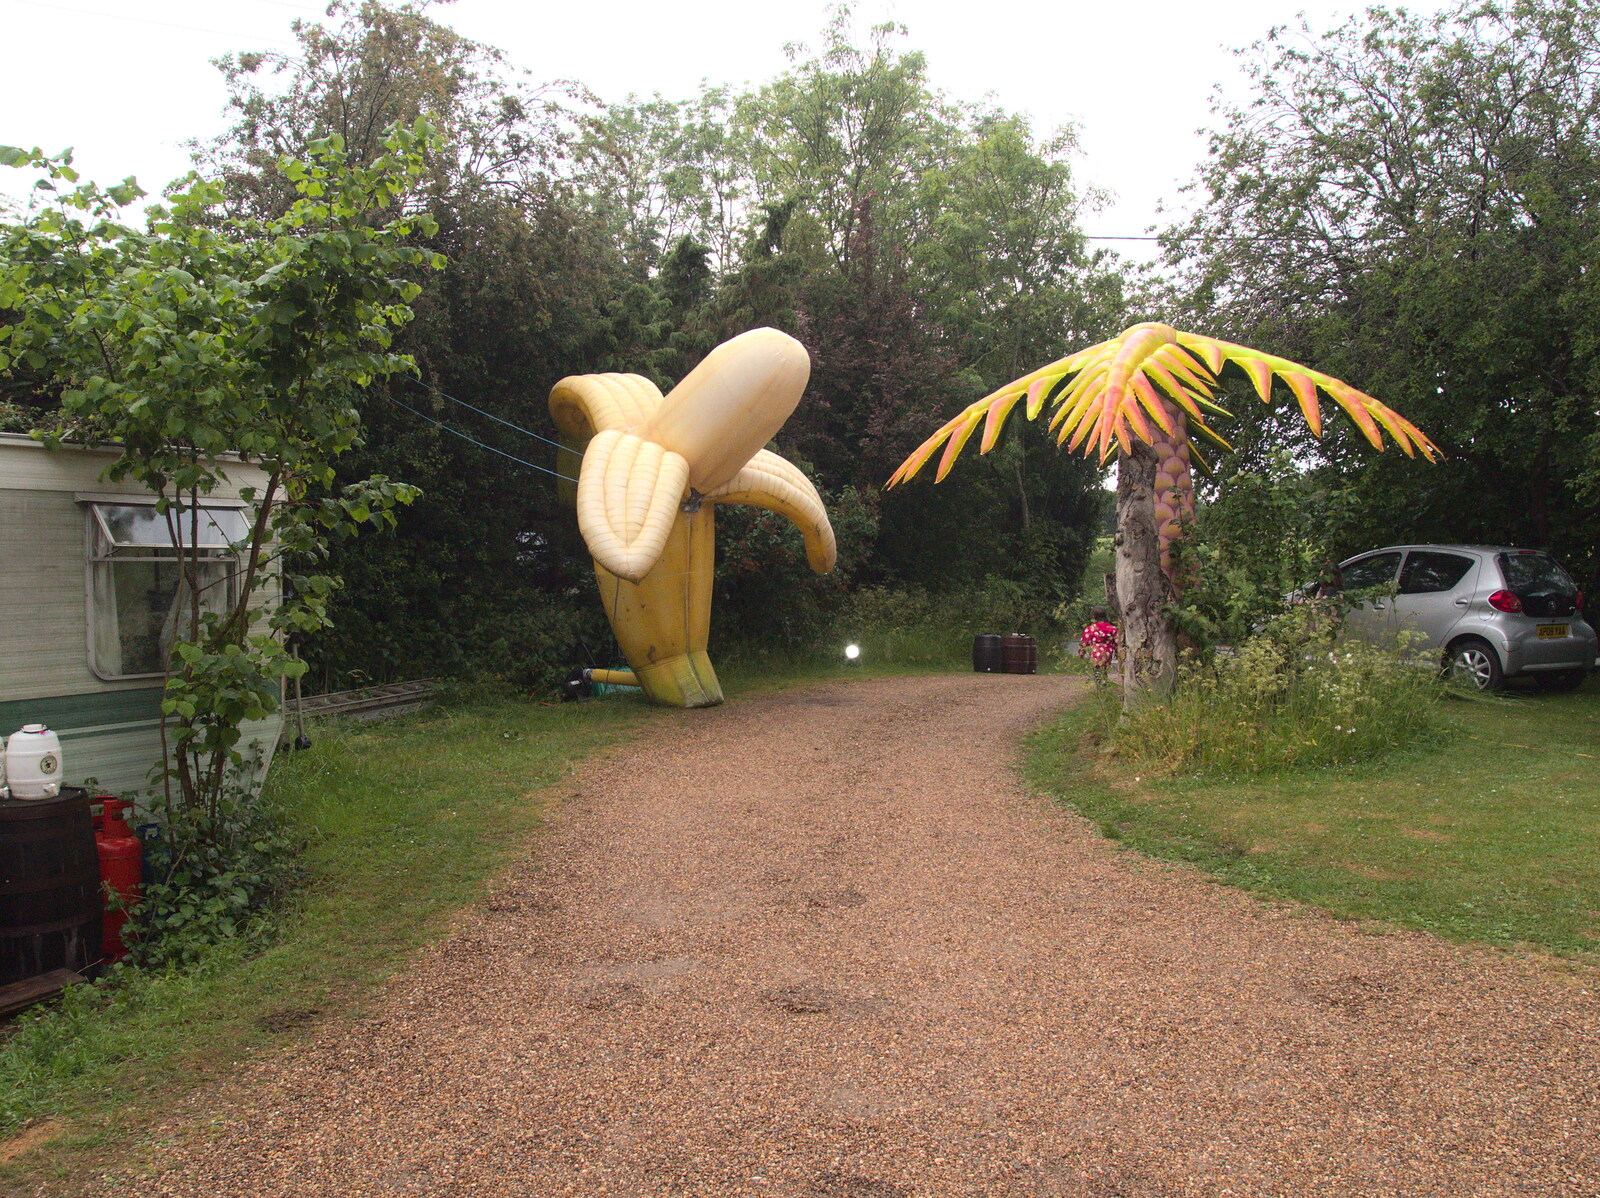 Inflatable banana and palm tree in Fersfield from The BBs at Fersfield, Norfolk - 11th June 2016